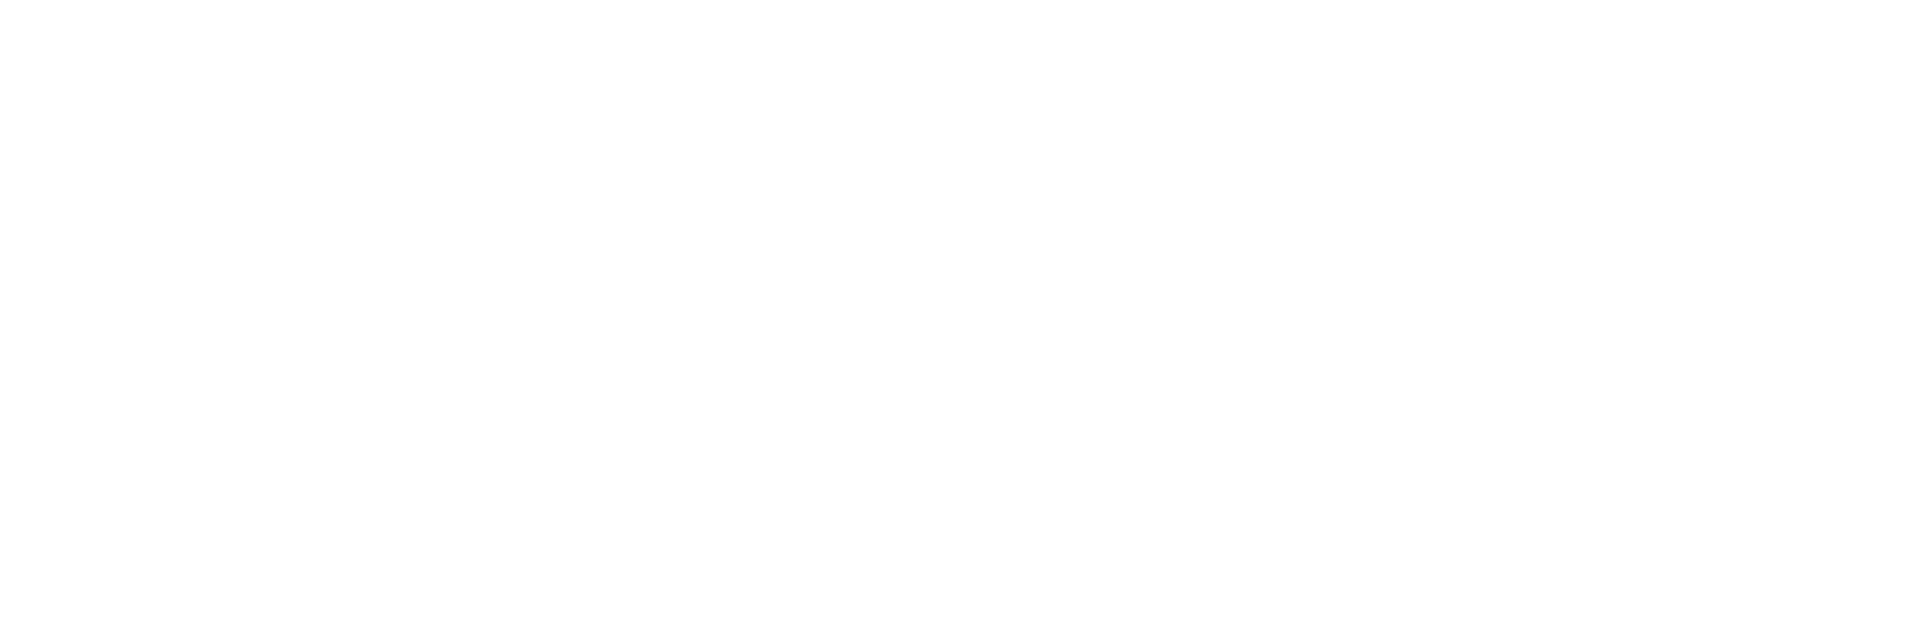 Groupe Paquet